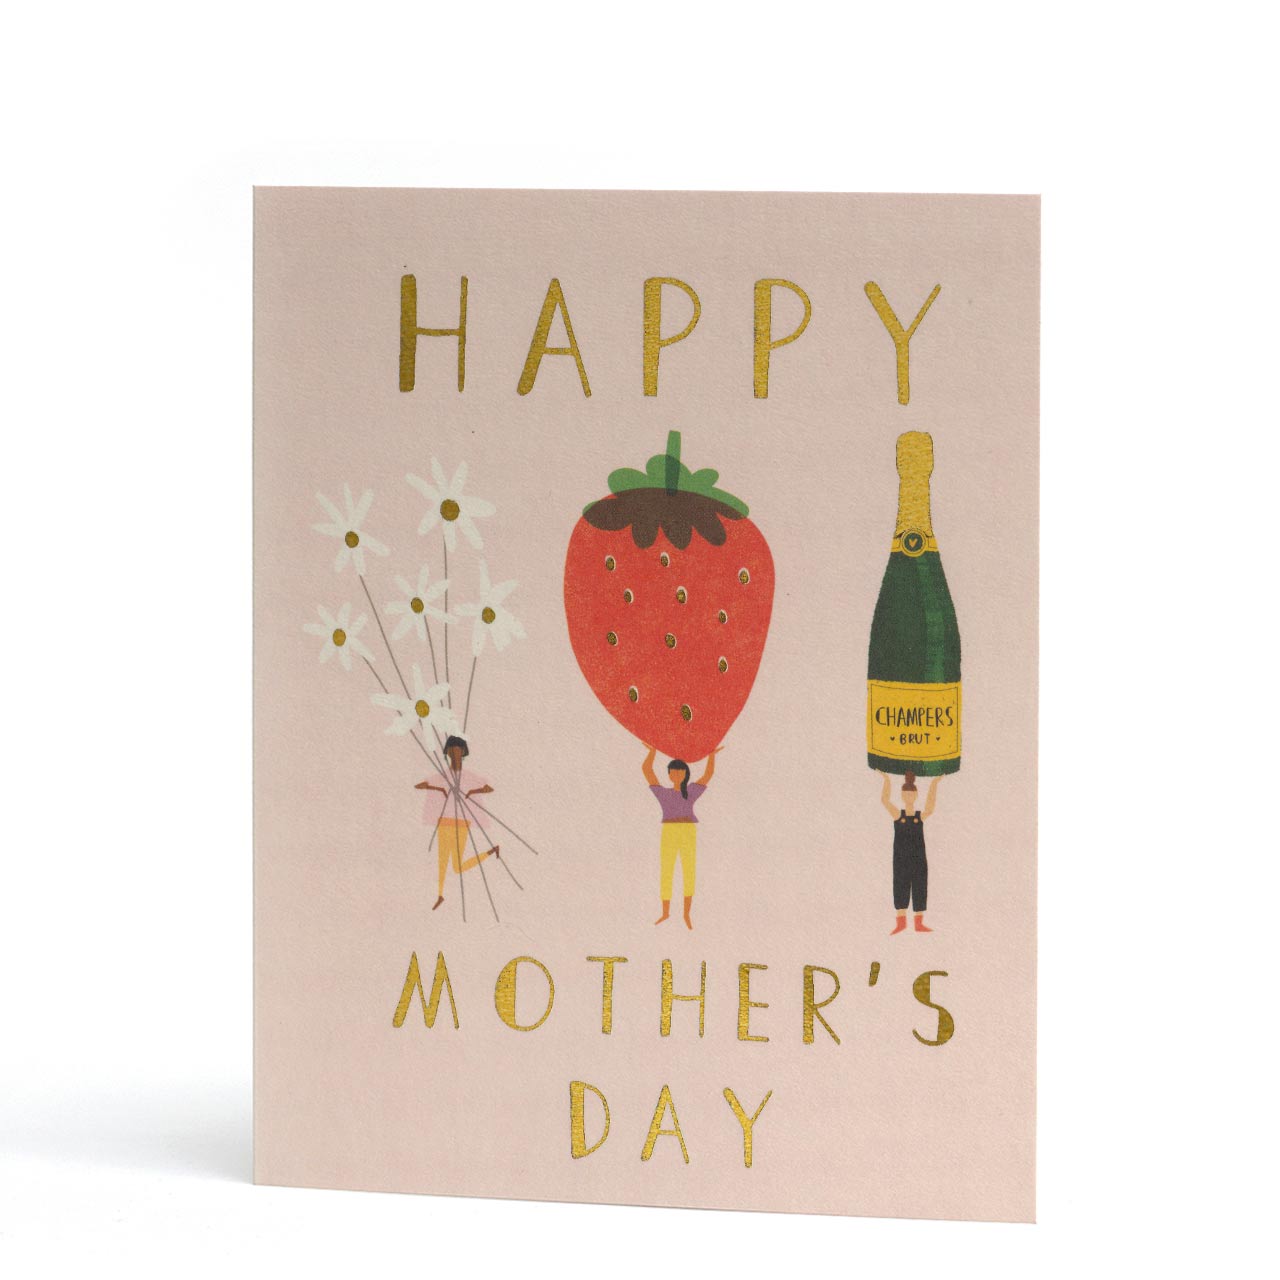 I Want Berries Mother's Day Gold Foil Greeting Card